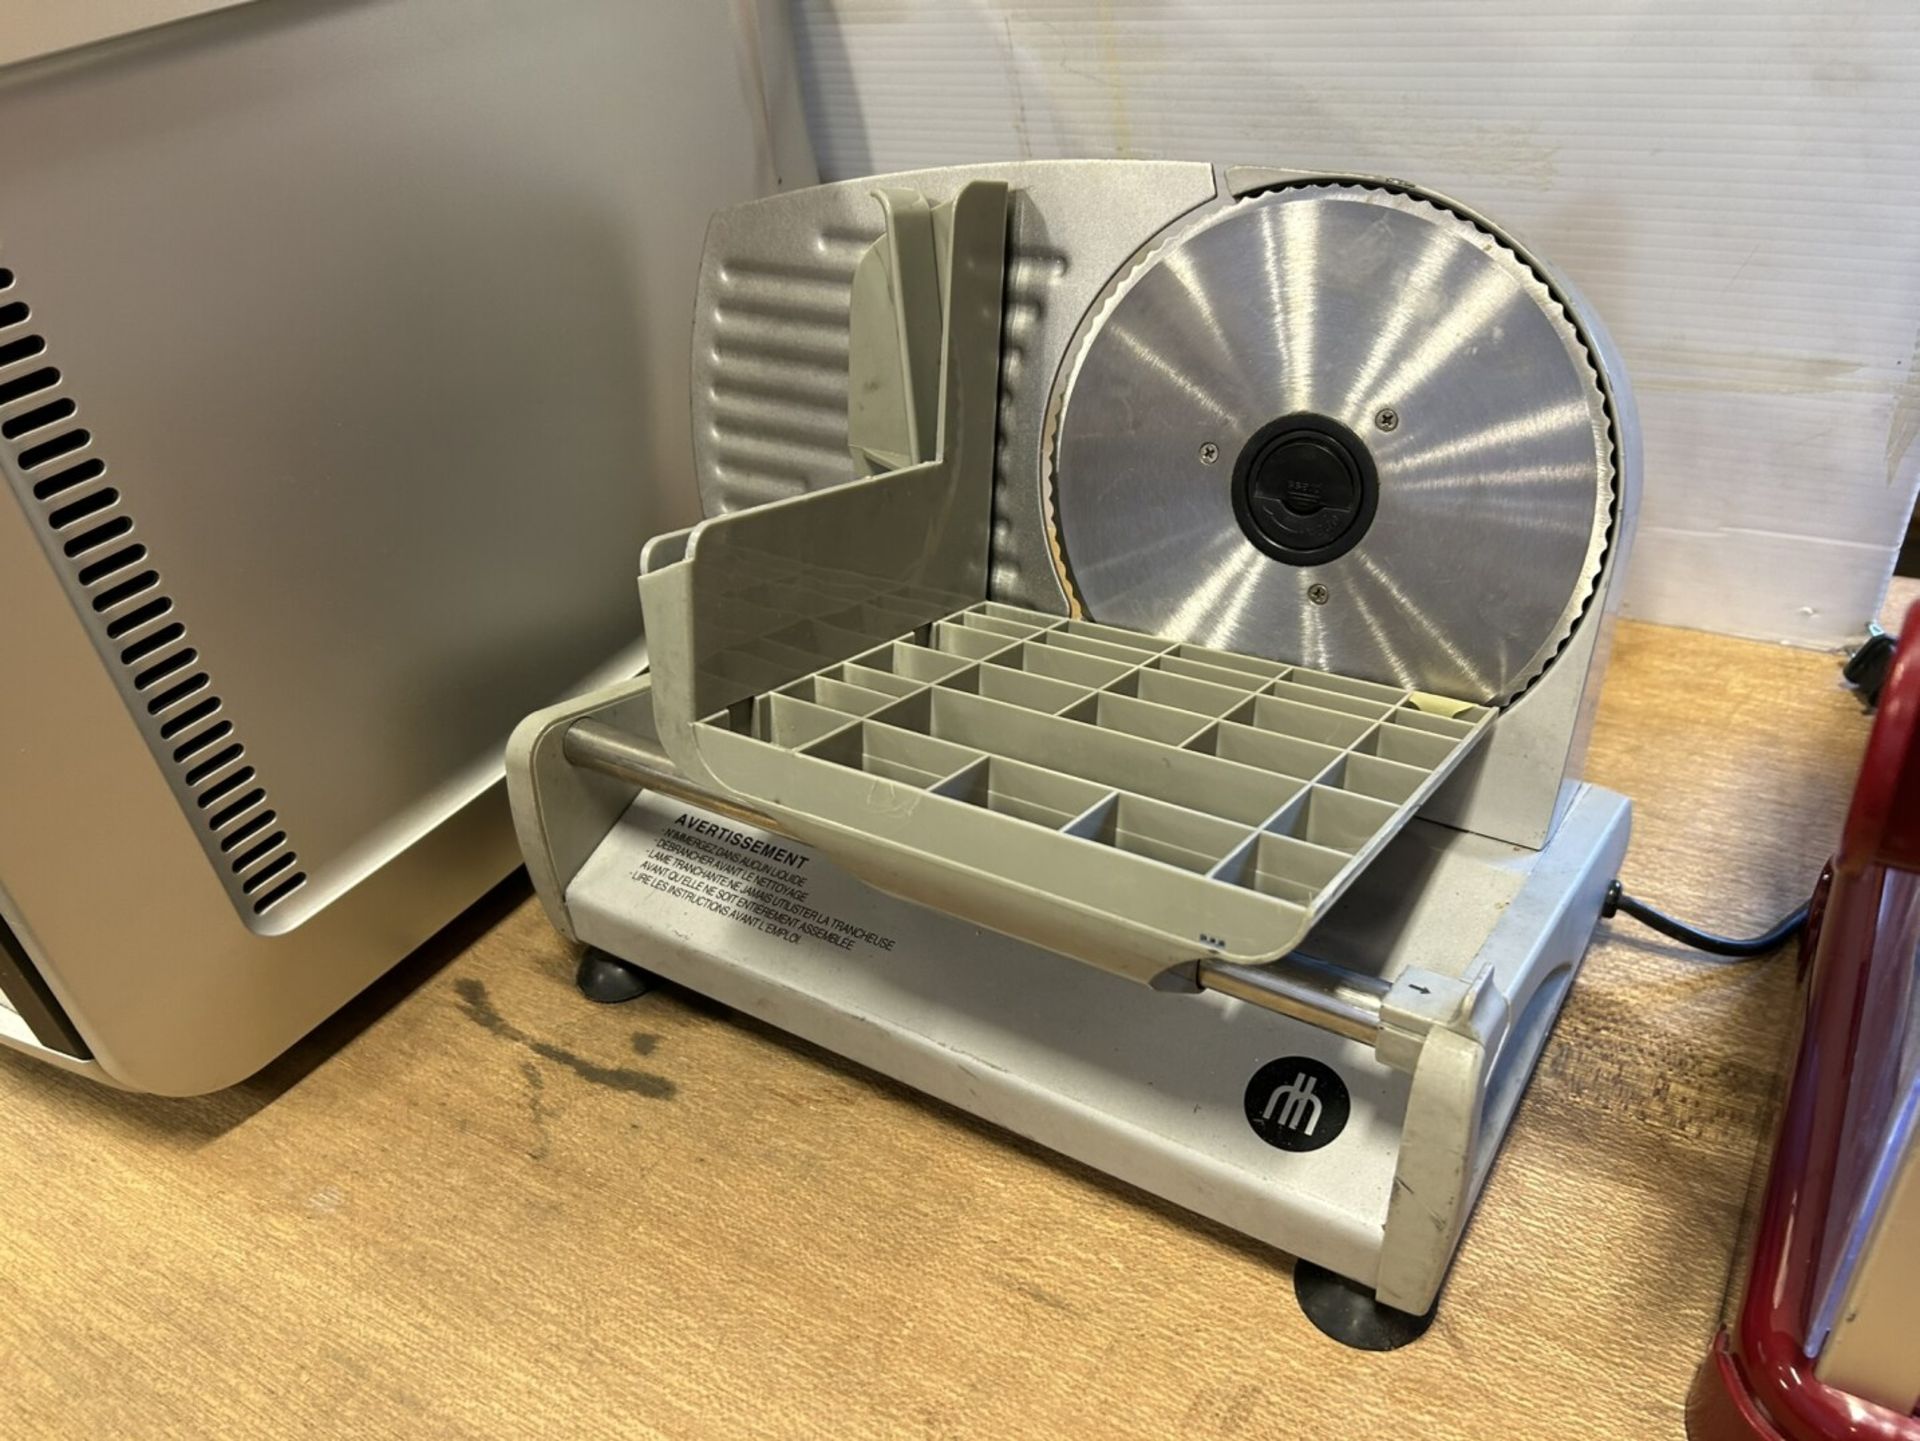 CABELA'S 10 TRAY FOOD DEHYDRATOR AND 2-ELEC. MEAT SLICERS - Image 8 of 8